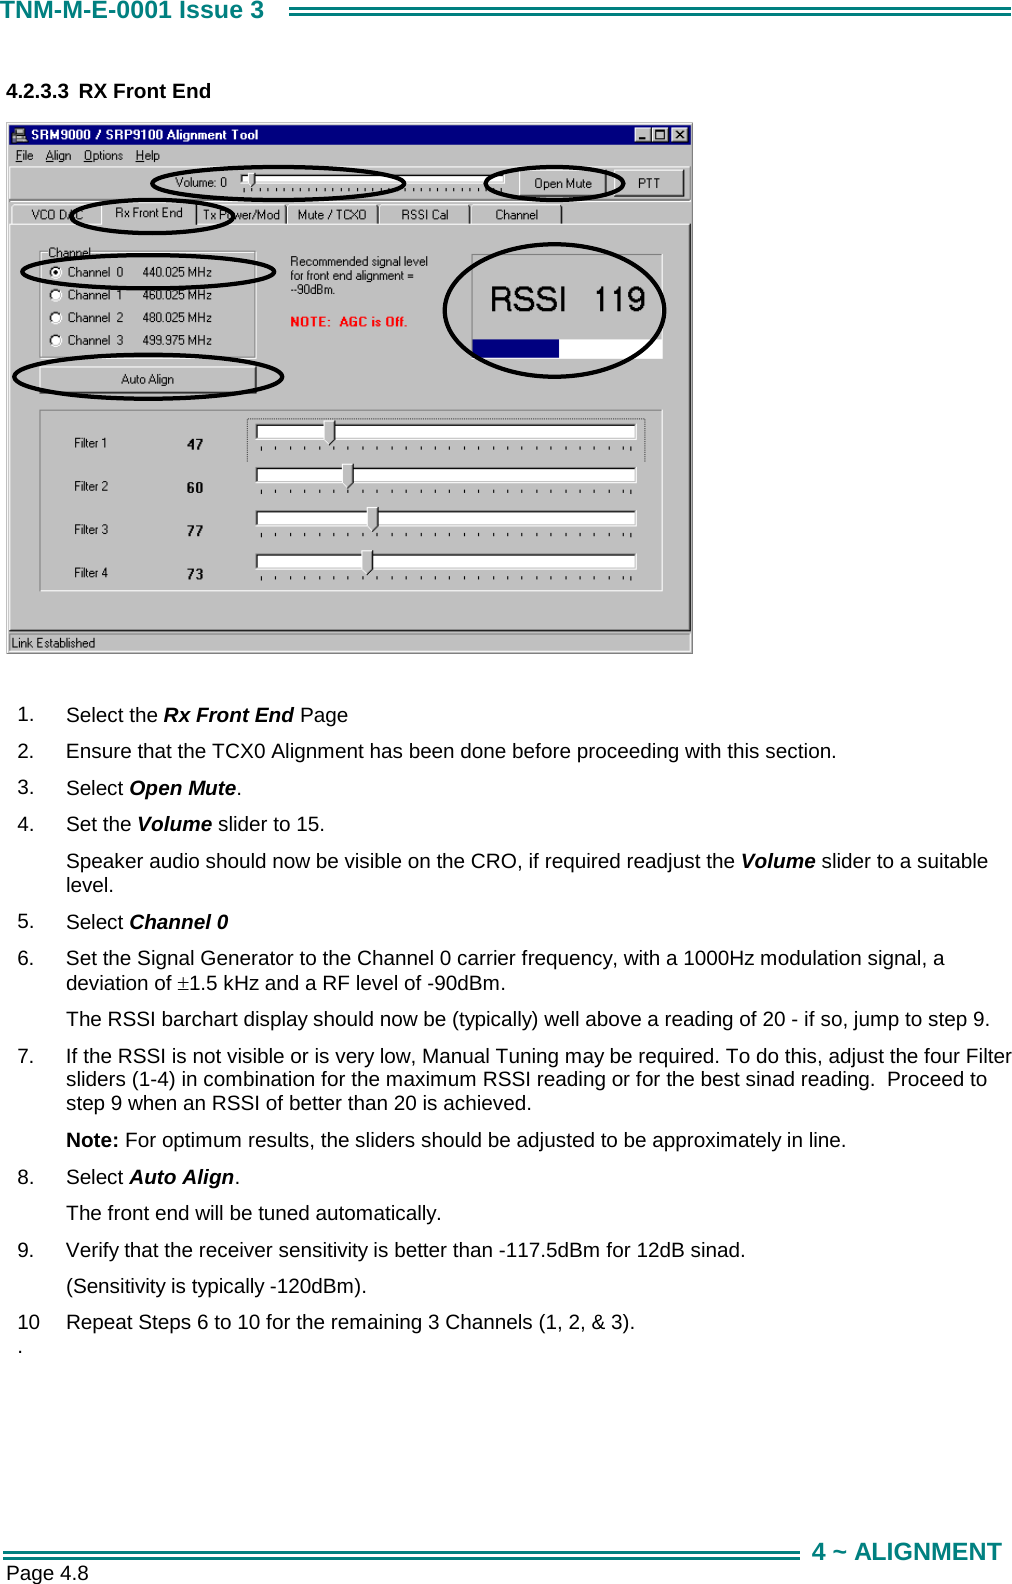  Page 4.8 TNM-M-E-0001 Issue 3 4 ~ ALIGNMENT 4.2.3.3  RX Front End    1.  Select the Rx Front End Page 2.  Ensure that the TCX0 Alignment has been done before proceeding with this section. 3.  Select Open Mute. 4.  Set the Volume slider to 15.  Speaker audio should now be visible on the CRO, if required readjust the Volume slider to a suitable level. 5.  Select Channel 0 6.  Set the Signal Generator to the Channel 0 carrier frequency, with a 1000Hz modulation signal, a deviation of ±1.5 kHz and a RF level of -90dBm.  The RSSI barchart display should now be (typically) well above a reading of 20 - if so, jump to step 9. 7.  If the RSSI is not visible or is very low, Manual Tuning may be required. To do this, adjust the four Filter sliders (1-4) in combination for the maximum RSSI reading or for the best sinad reading.  Proceed to step 9 when an RSSI of better than 20 is achieved. Note: For optimum results, the sliders should be adjusted to be approximately in line. 8.  Select Auto Align. The front end will be tuned automatically. 9.  Verify that the receiver sensitivity is better than -117.5dBm for 12dB sinad.  (Sensitivity is typically -120dBm). 10.  Repeat Steps 6 to 10 for the remaining 3 Channels (1, 2, &amp; 3).  